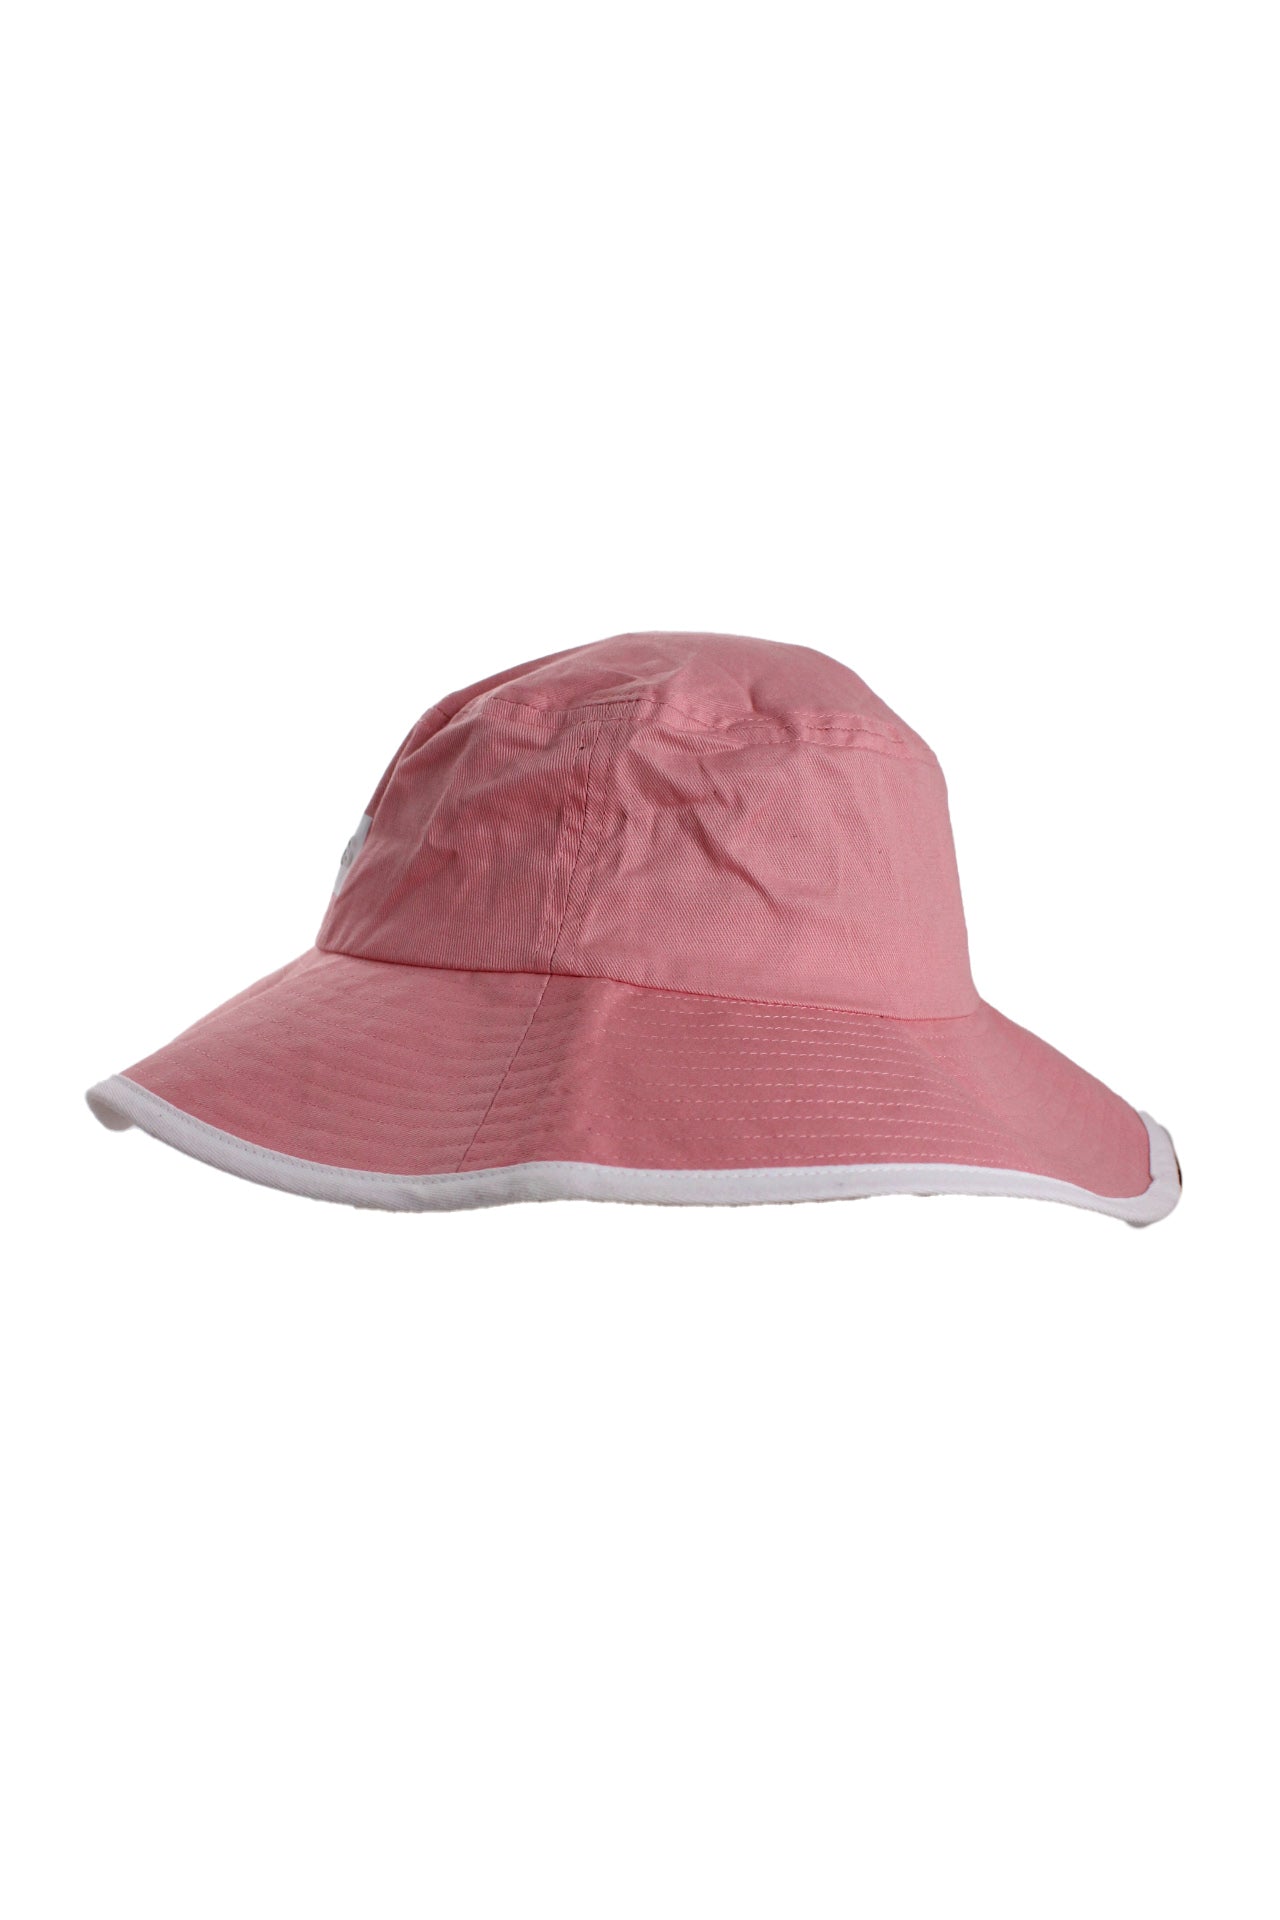 profile of pink bucket hat with white trimmed brim